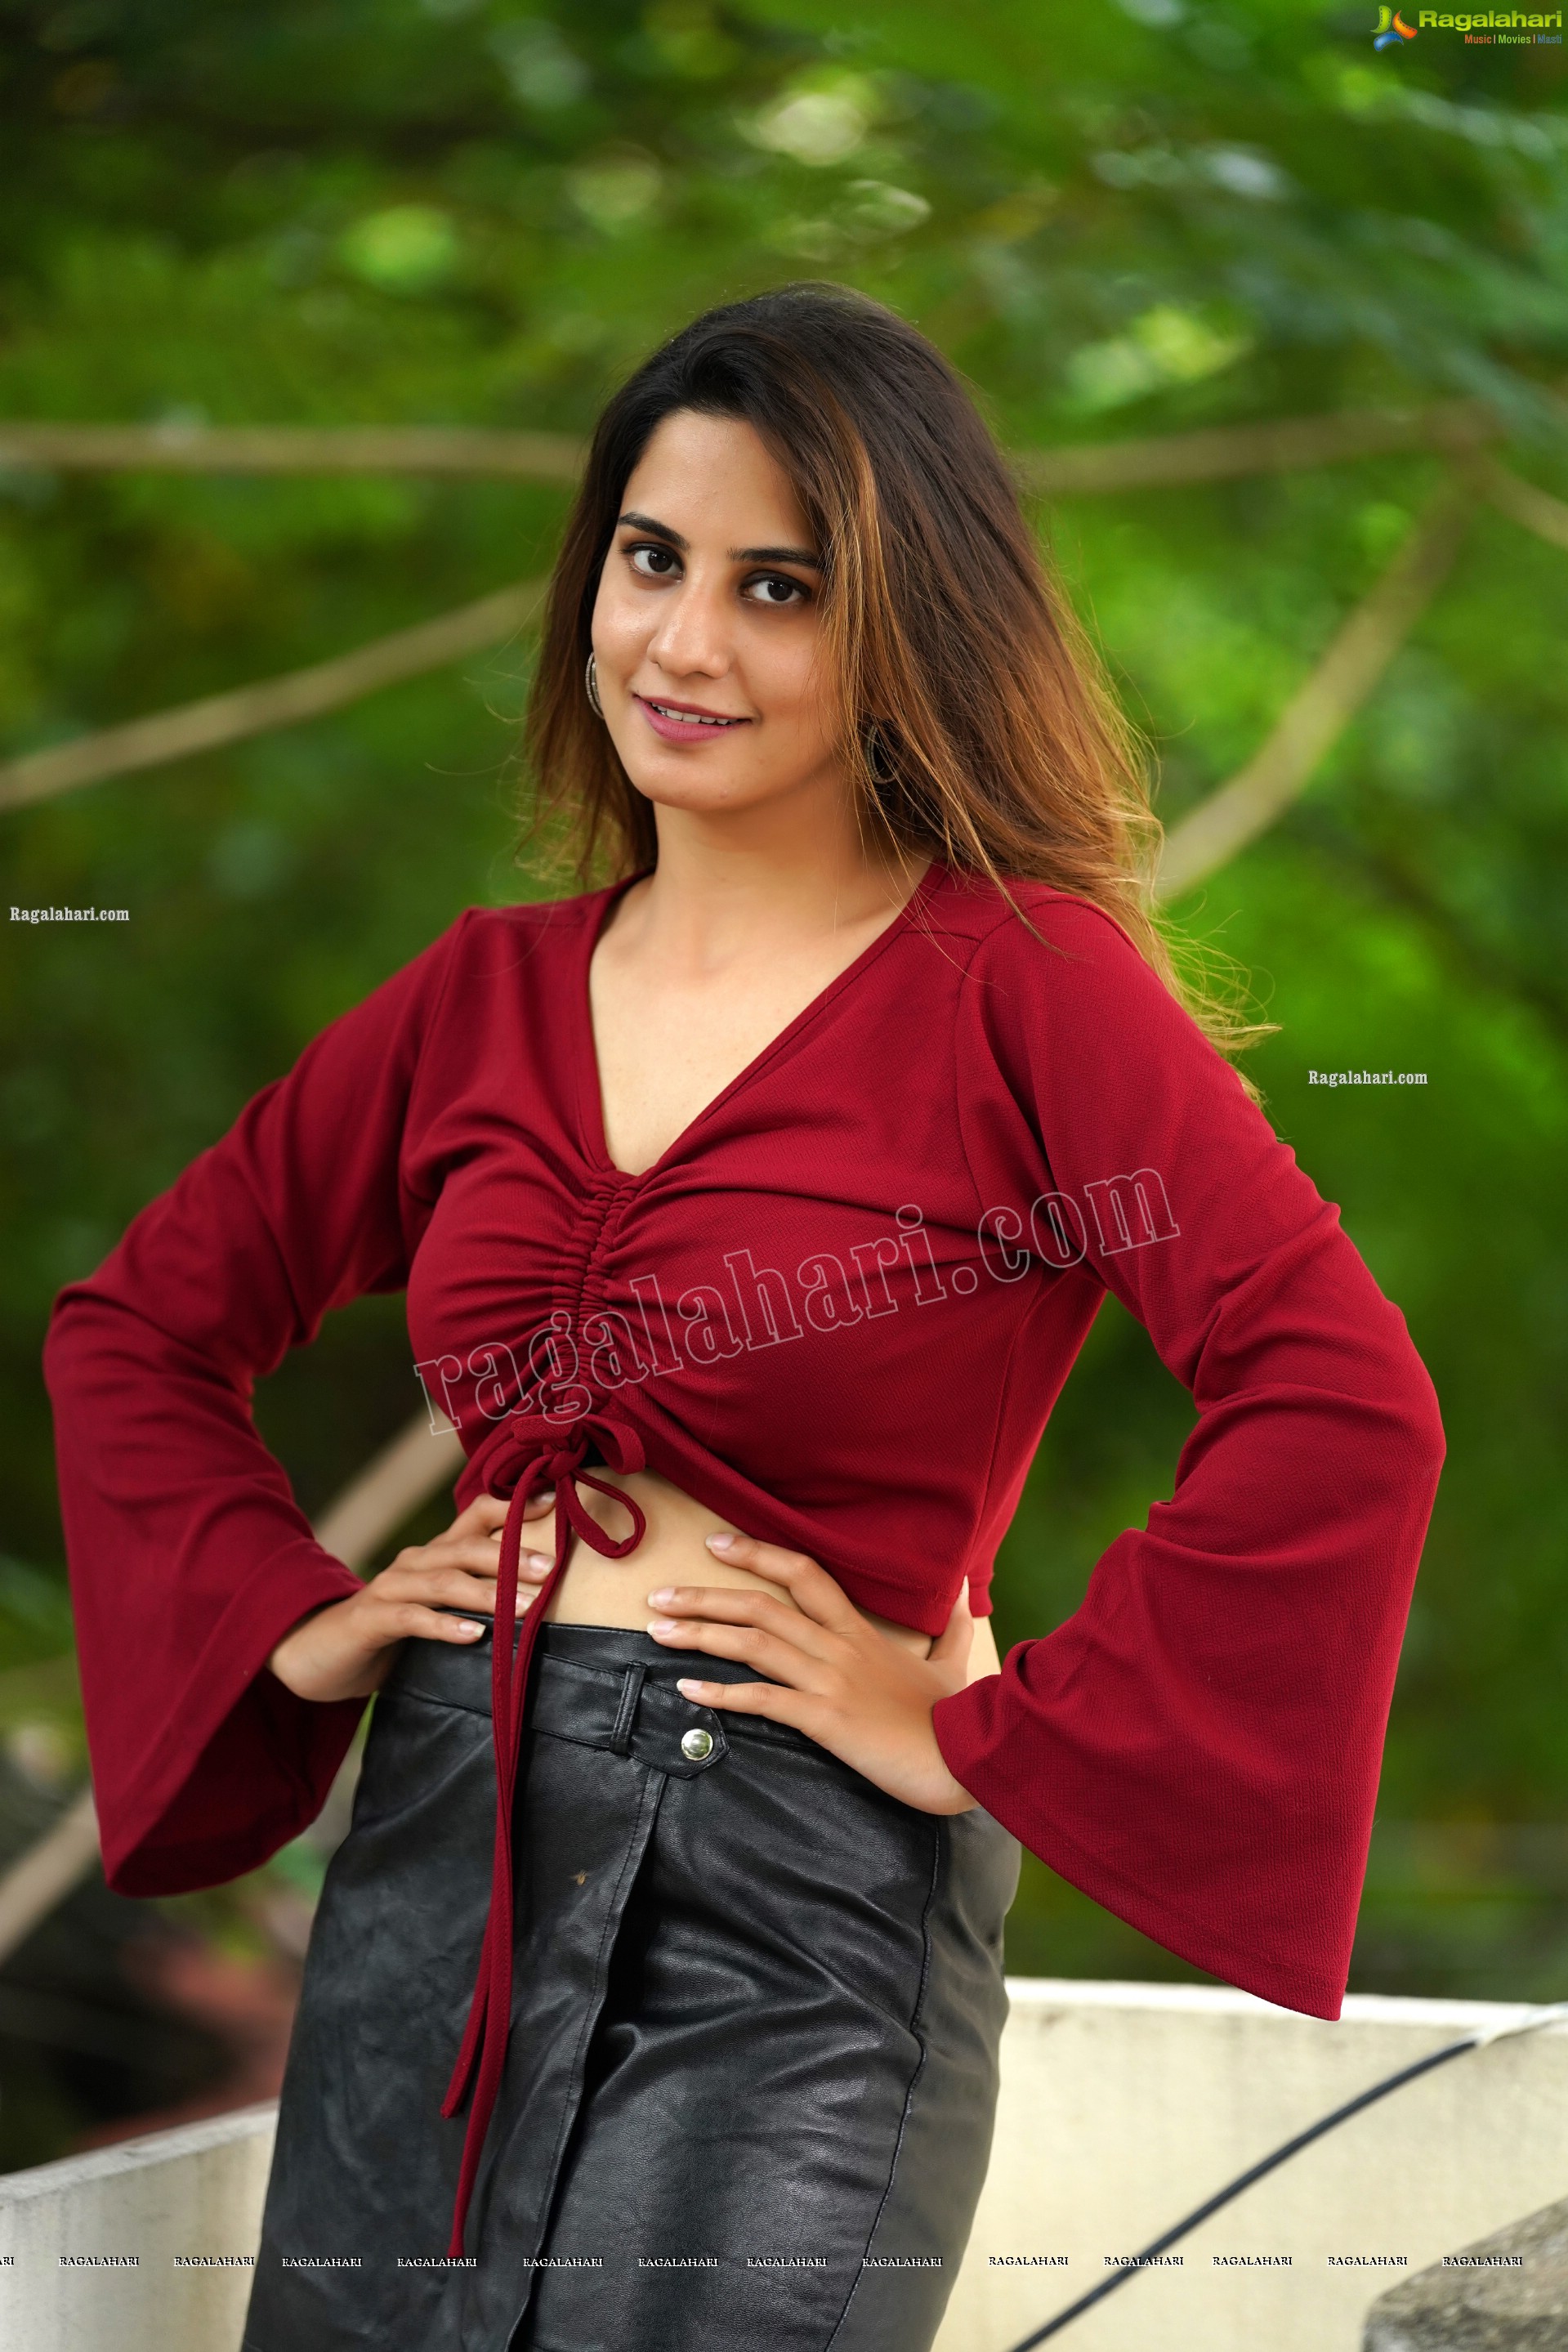 Tejal Tammali in Black Leather Mini Skirt and Red Top, Exclusive Photoshoot